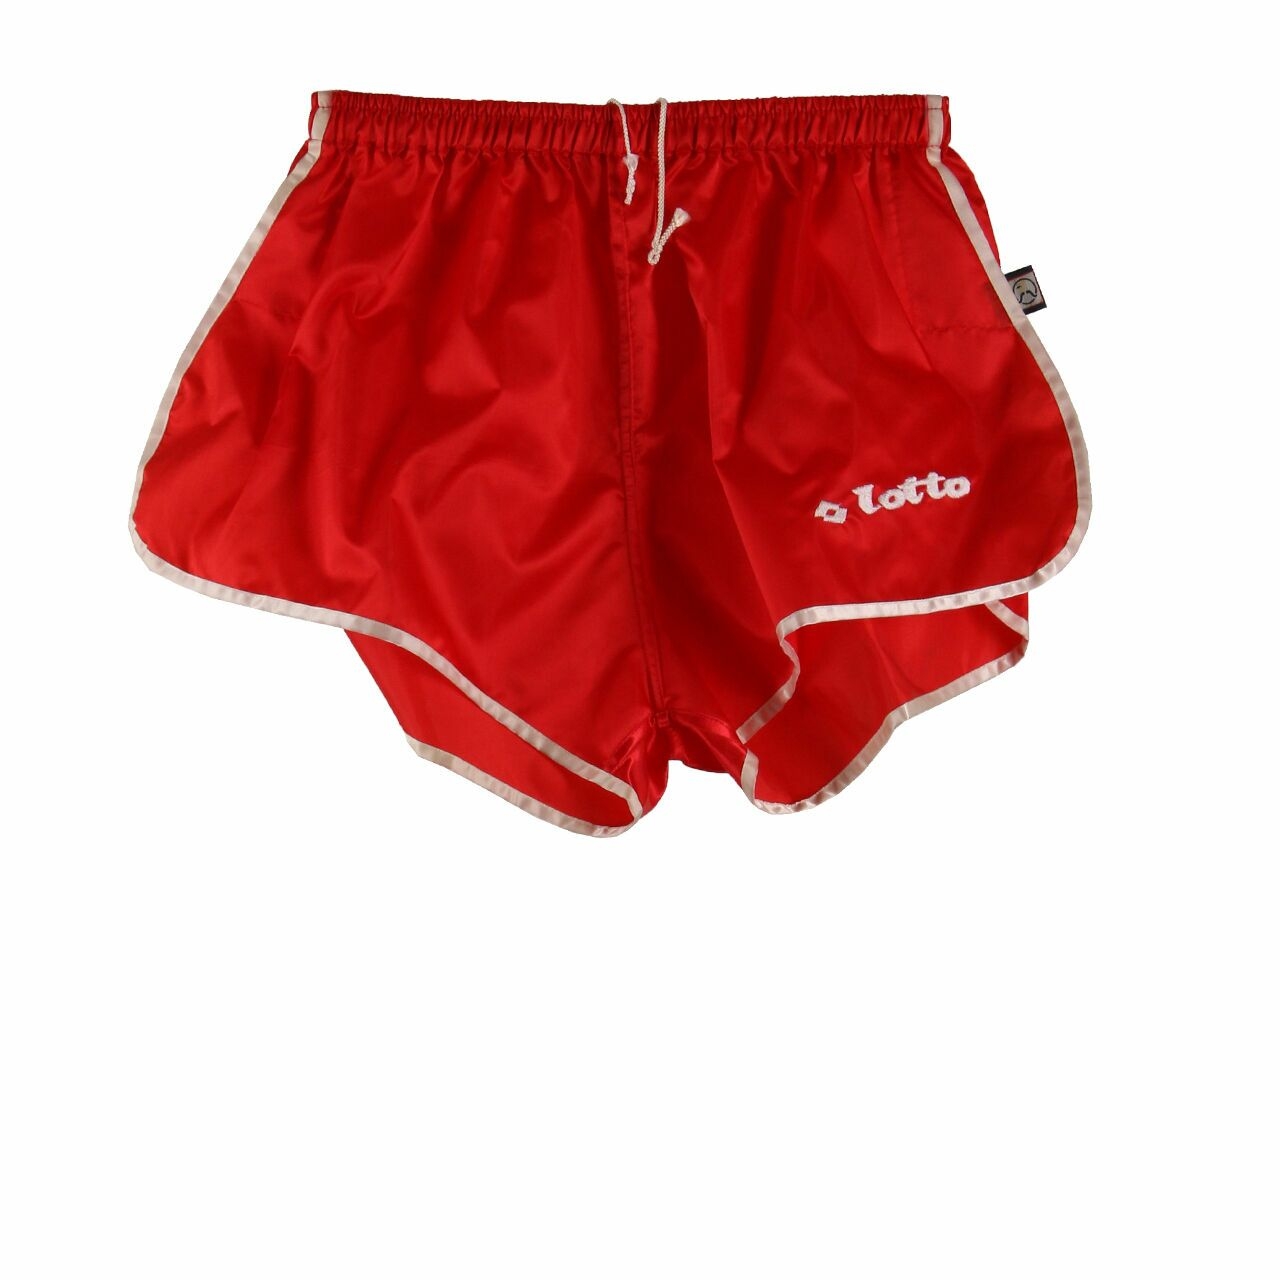 Lotto Red Sport Pants